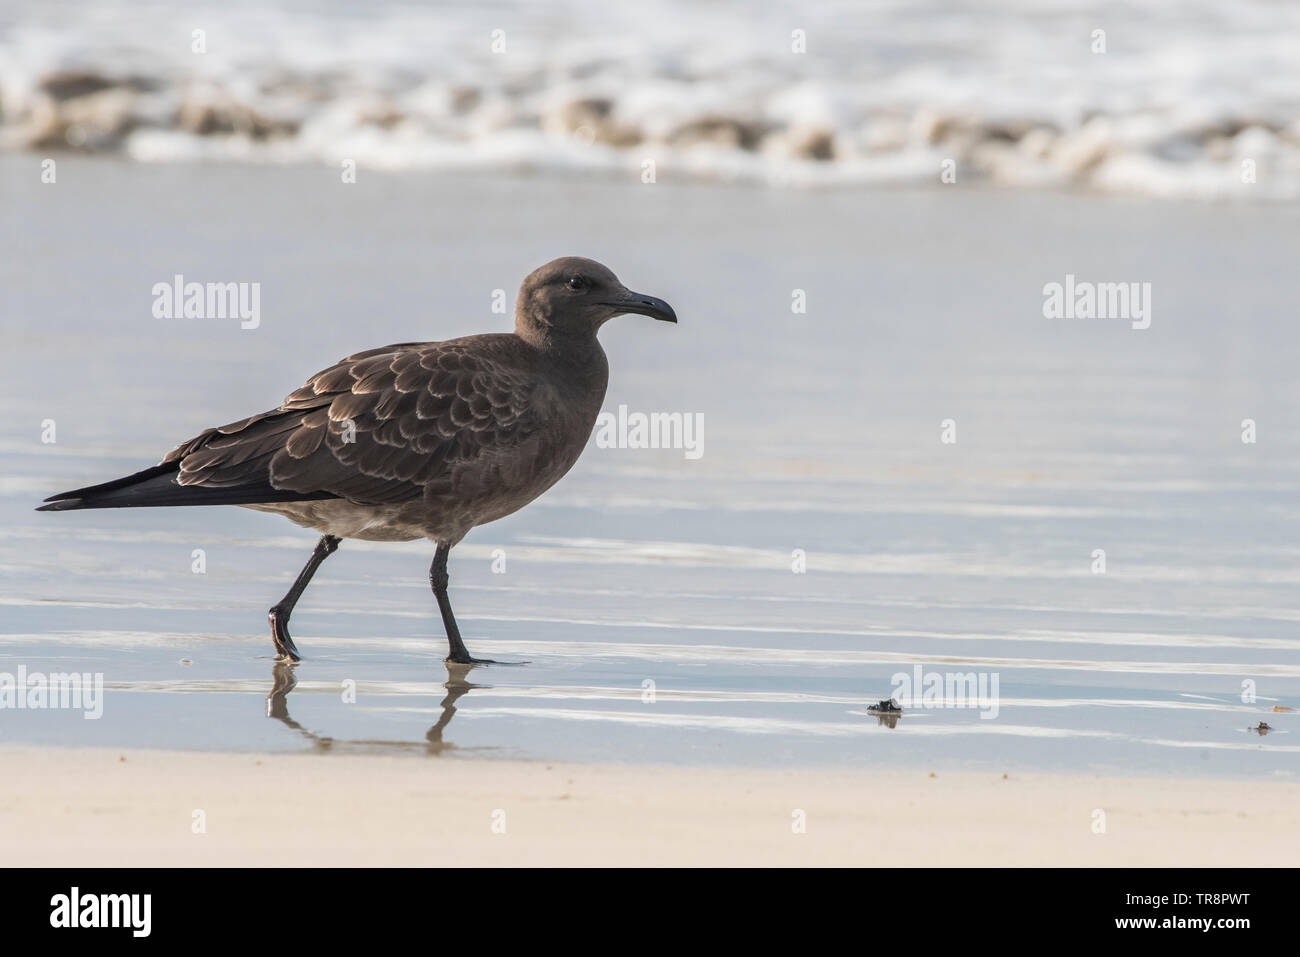 A lava gull (Leucophaeus fuliginosus) from Isabela island in the Galapagos. Endemic to the islands, its is considered the rarest gull species. Stock Photo